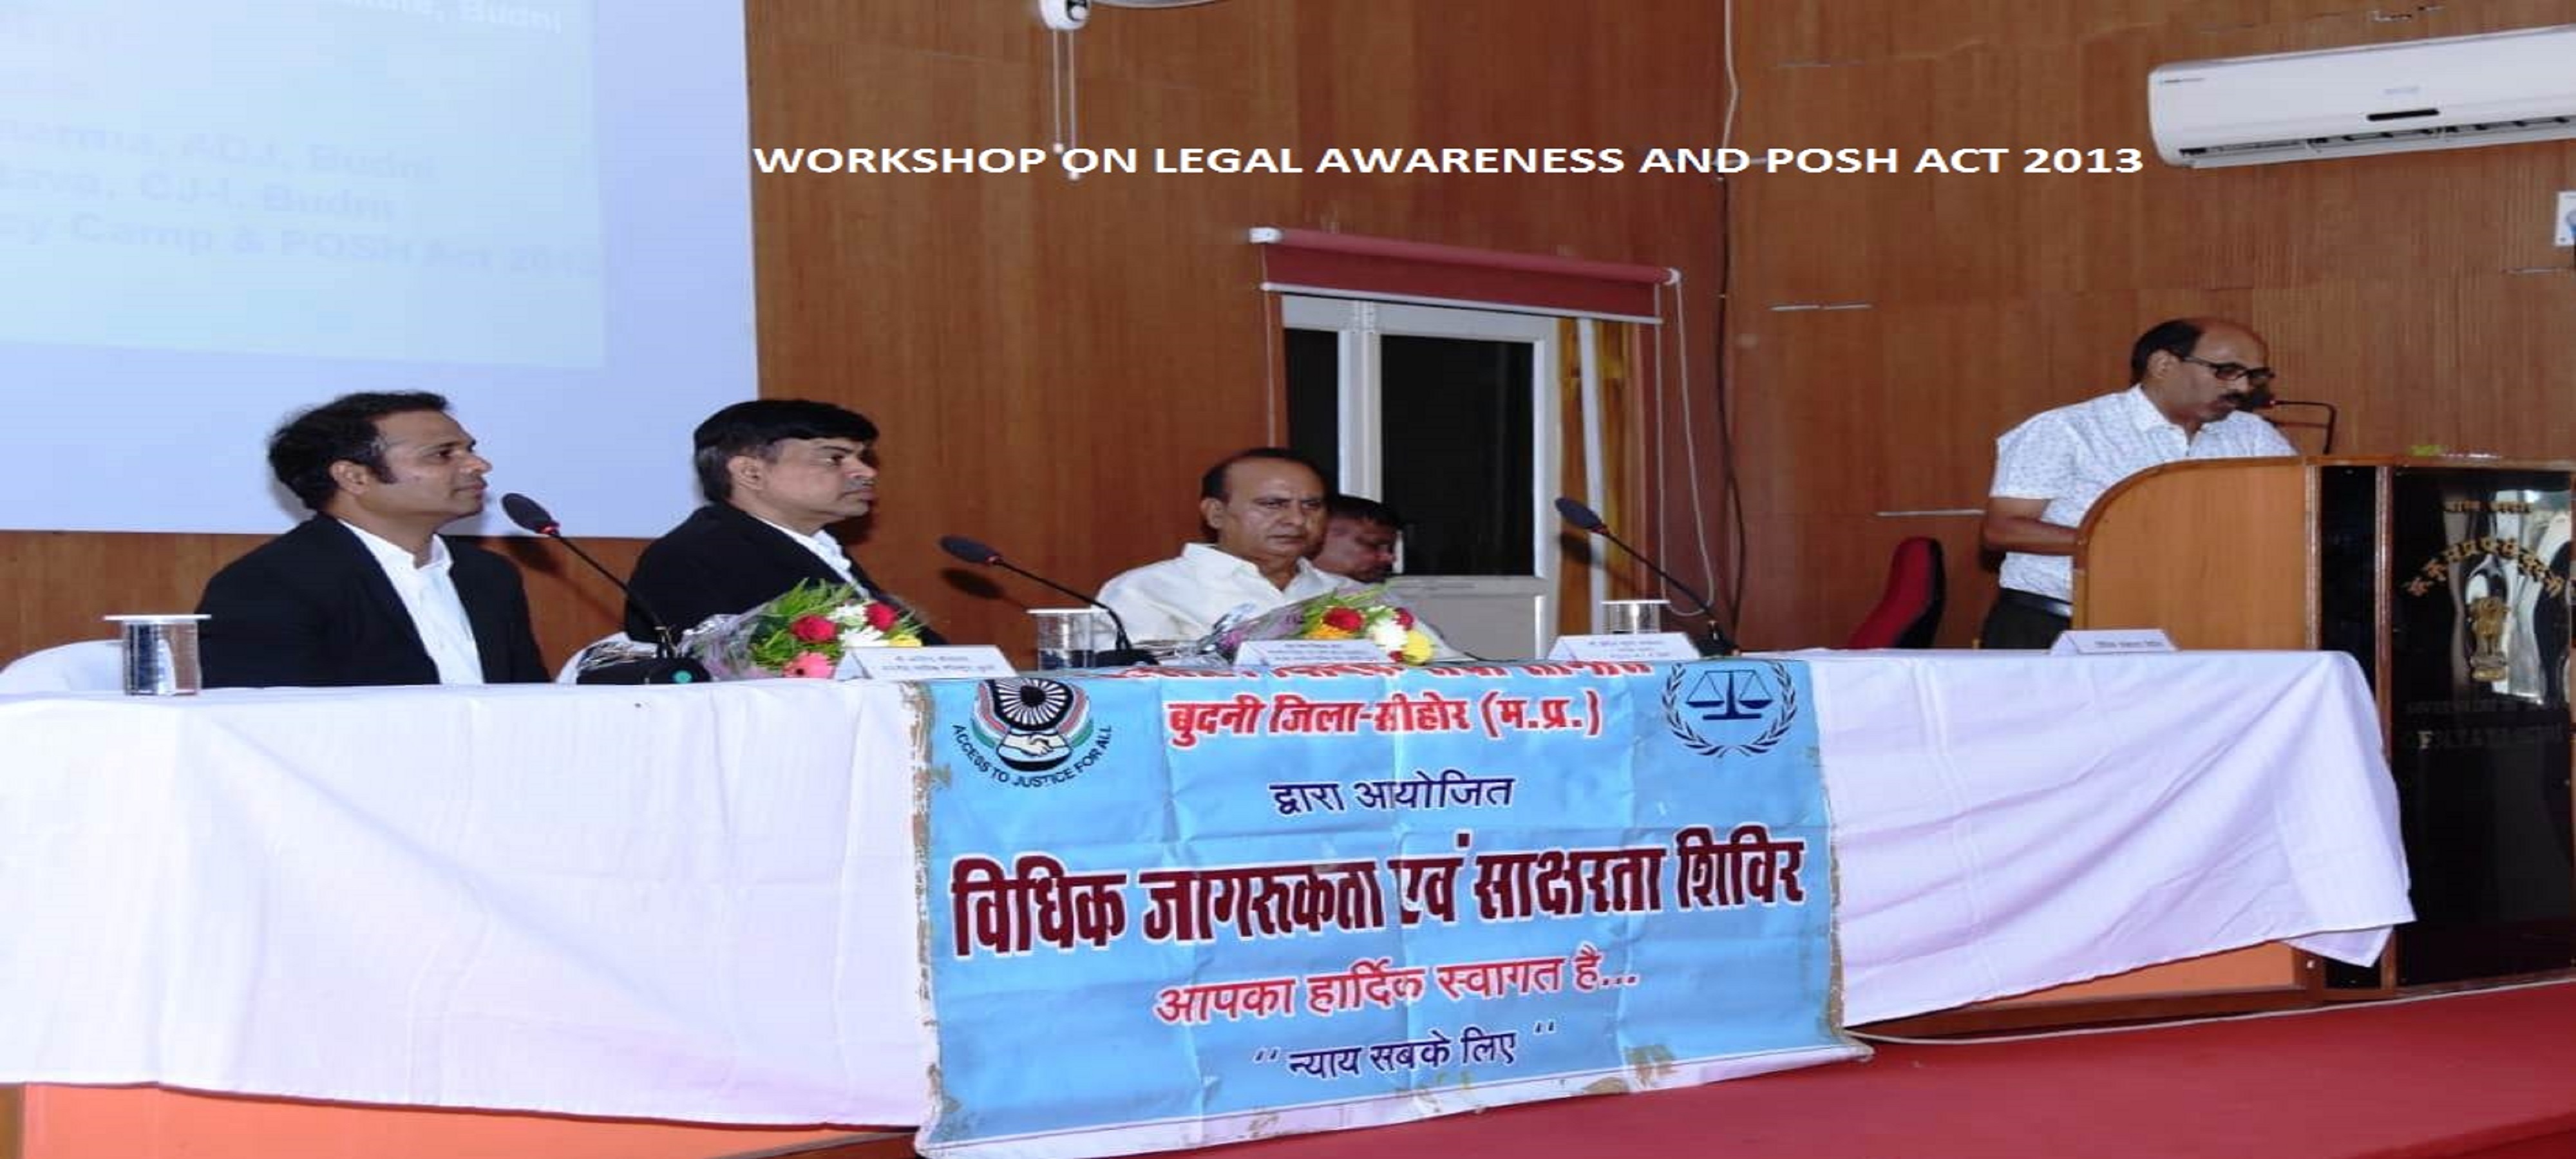 WORKSHOP ON LEGAL AWARENESS AND POSH ACT